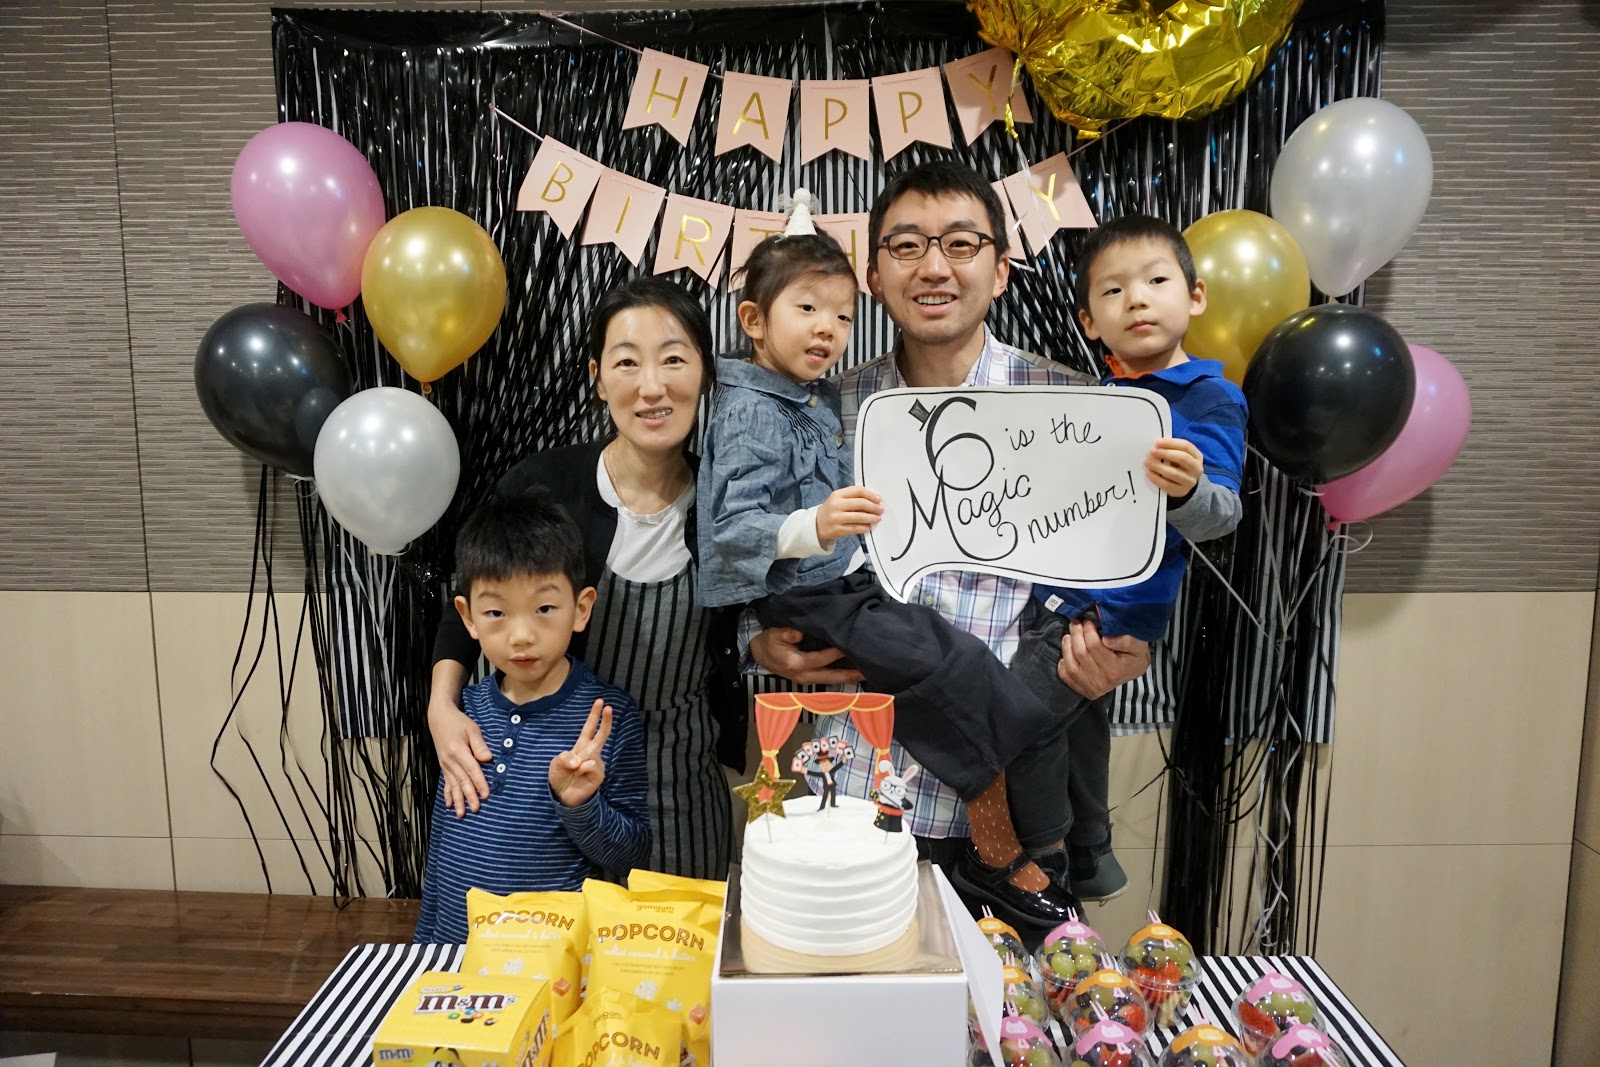 SIX IS THE MAGIC NUMBER BIRTHDAY PARTY! - Seoulful Family